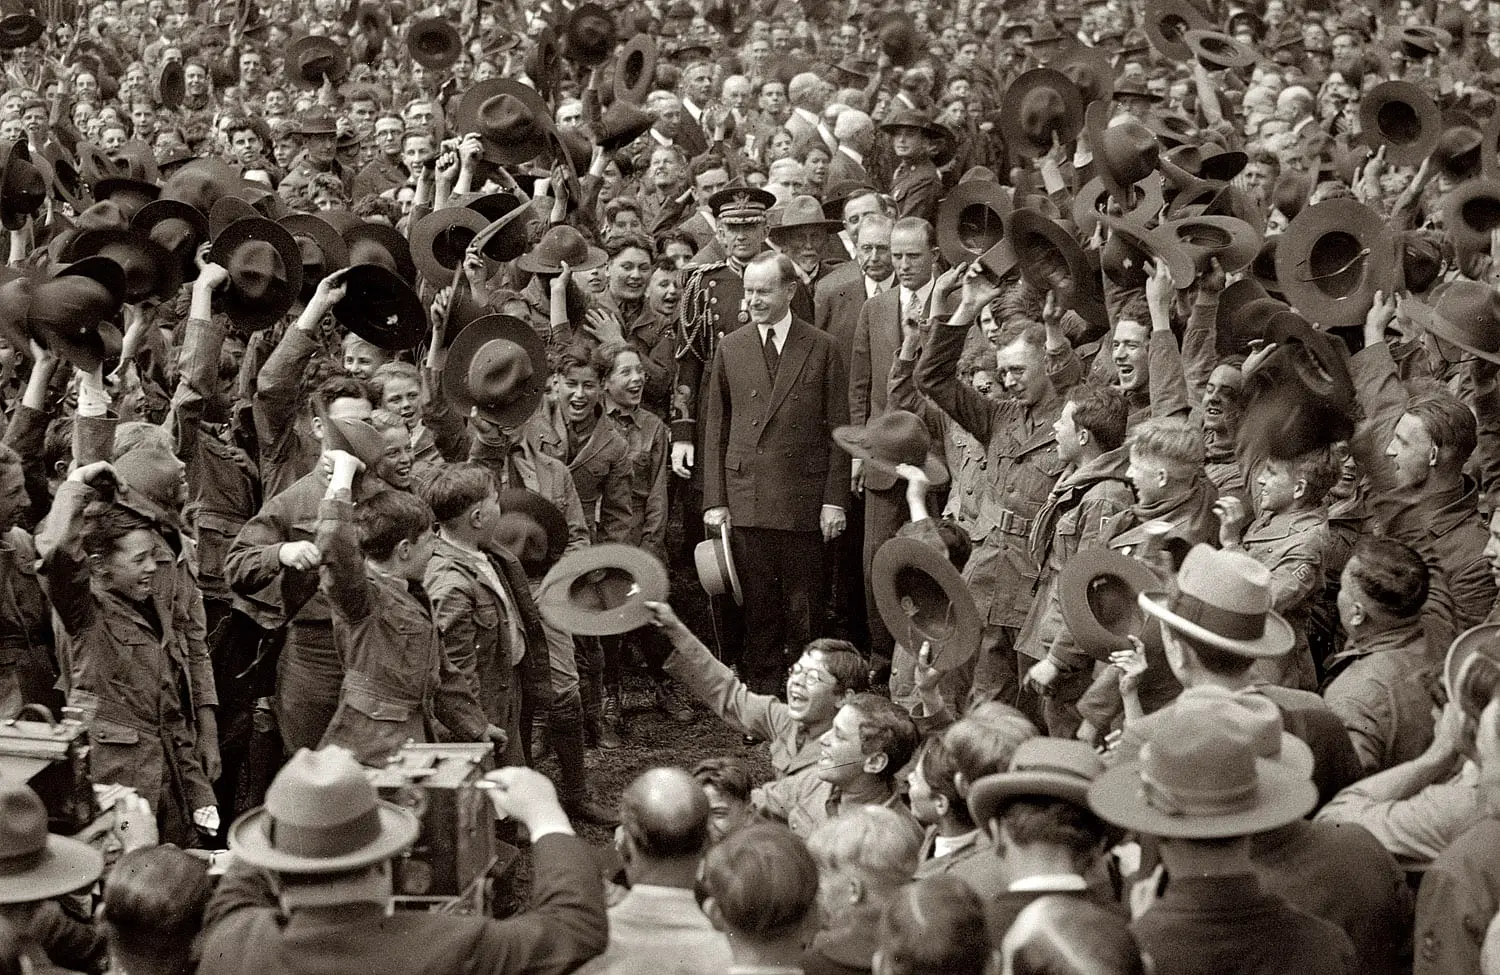 May 1, 1926. President Coolidge and Boy Scouts on the South Lawn of the White House.